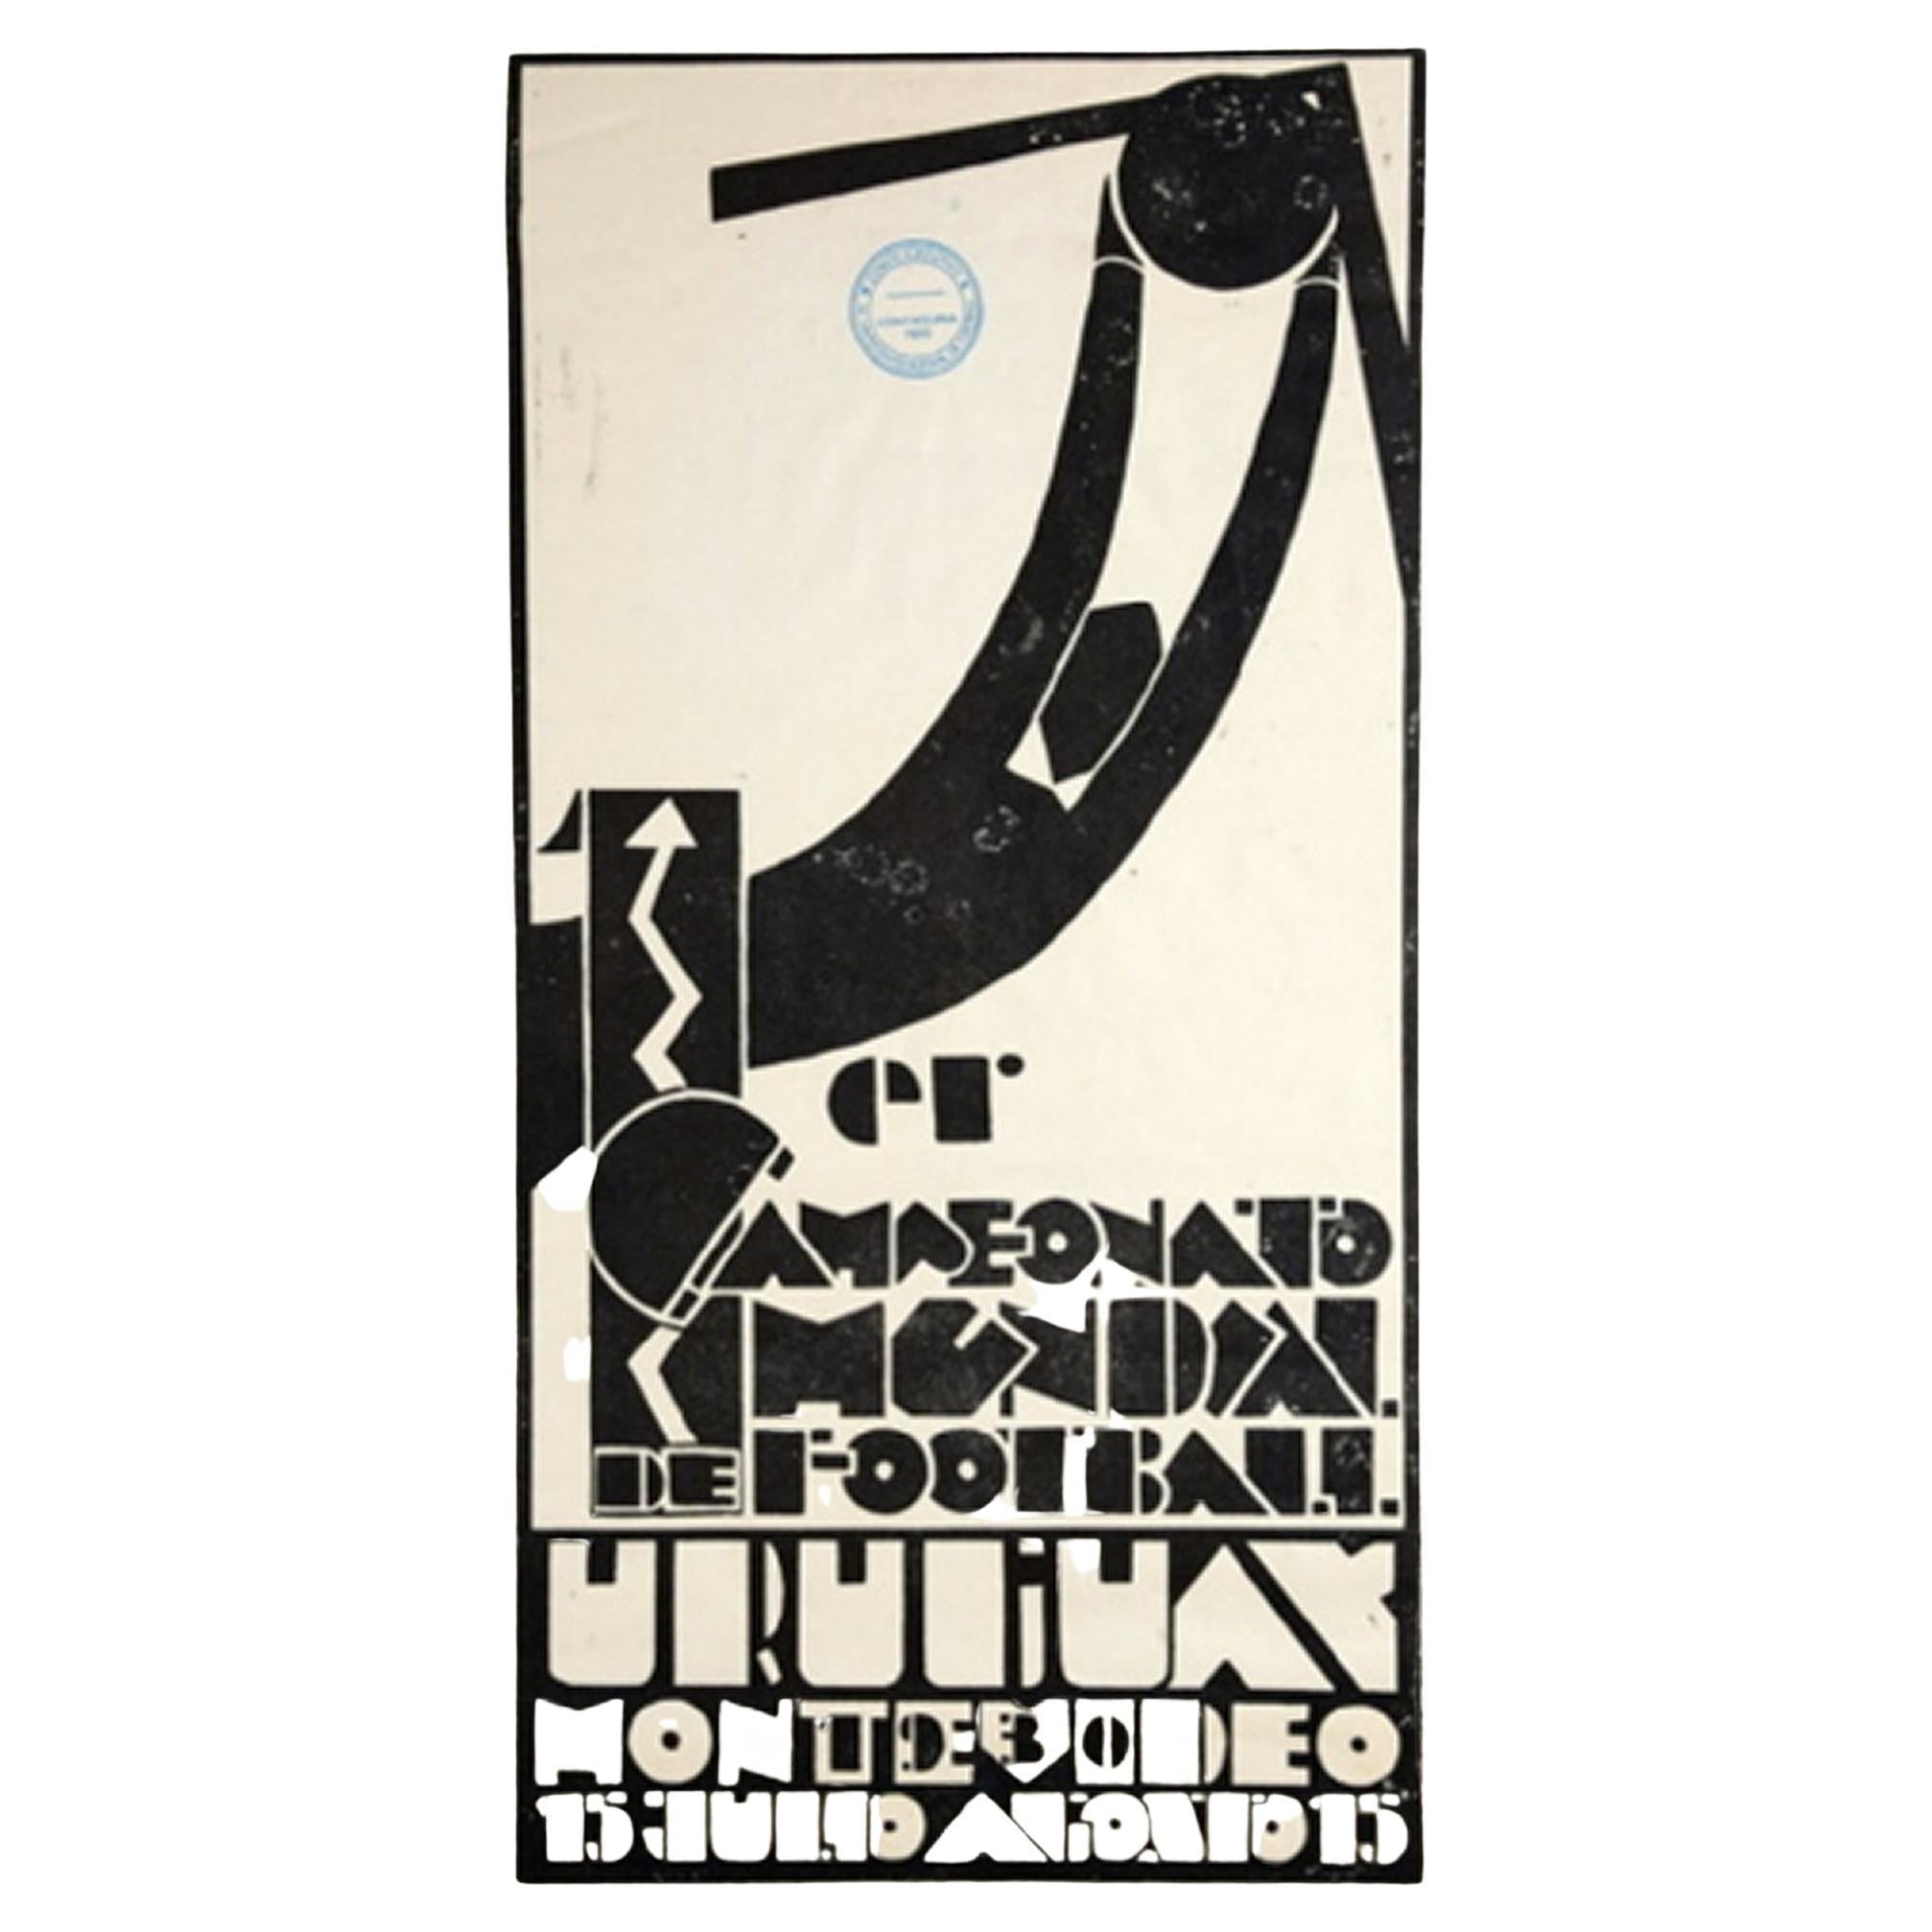 Rare 1930 World Cup Poster